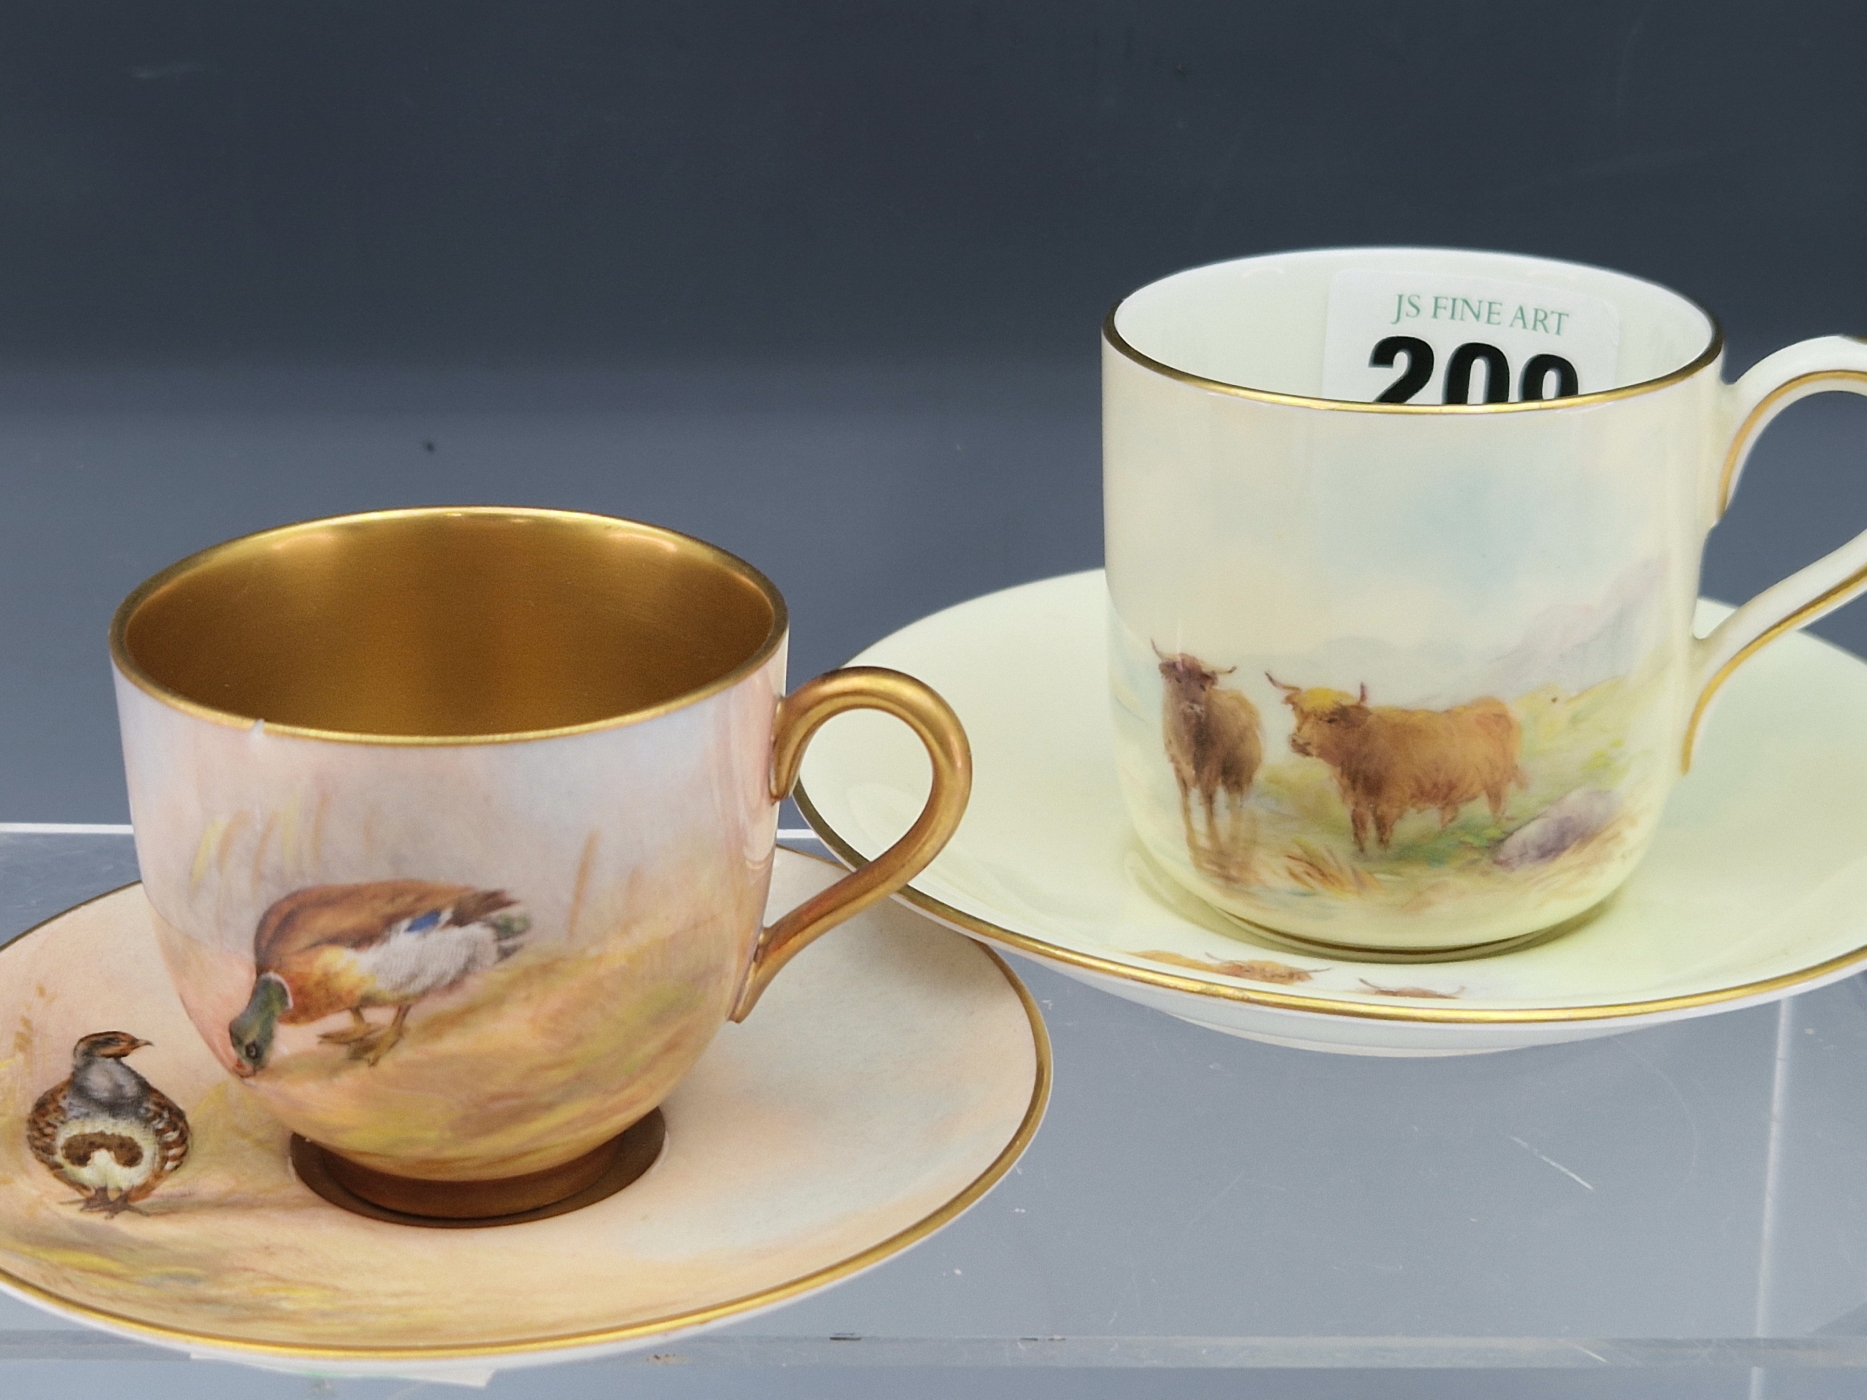 TWO ROYAL WORCESTER COFFEE CUPS AND SAUCERS, ONE PAINTED WITH CATTLE BY STINTON 1933 AND THE OTHER